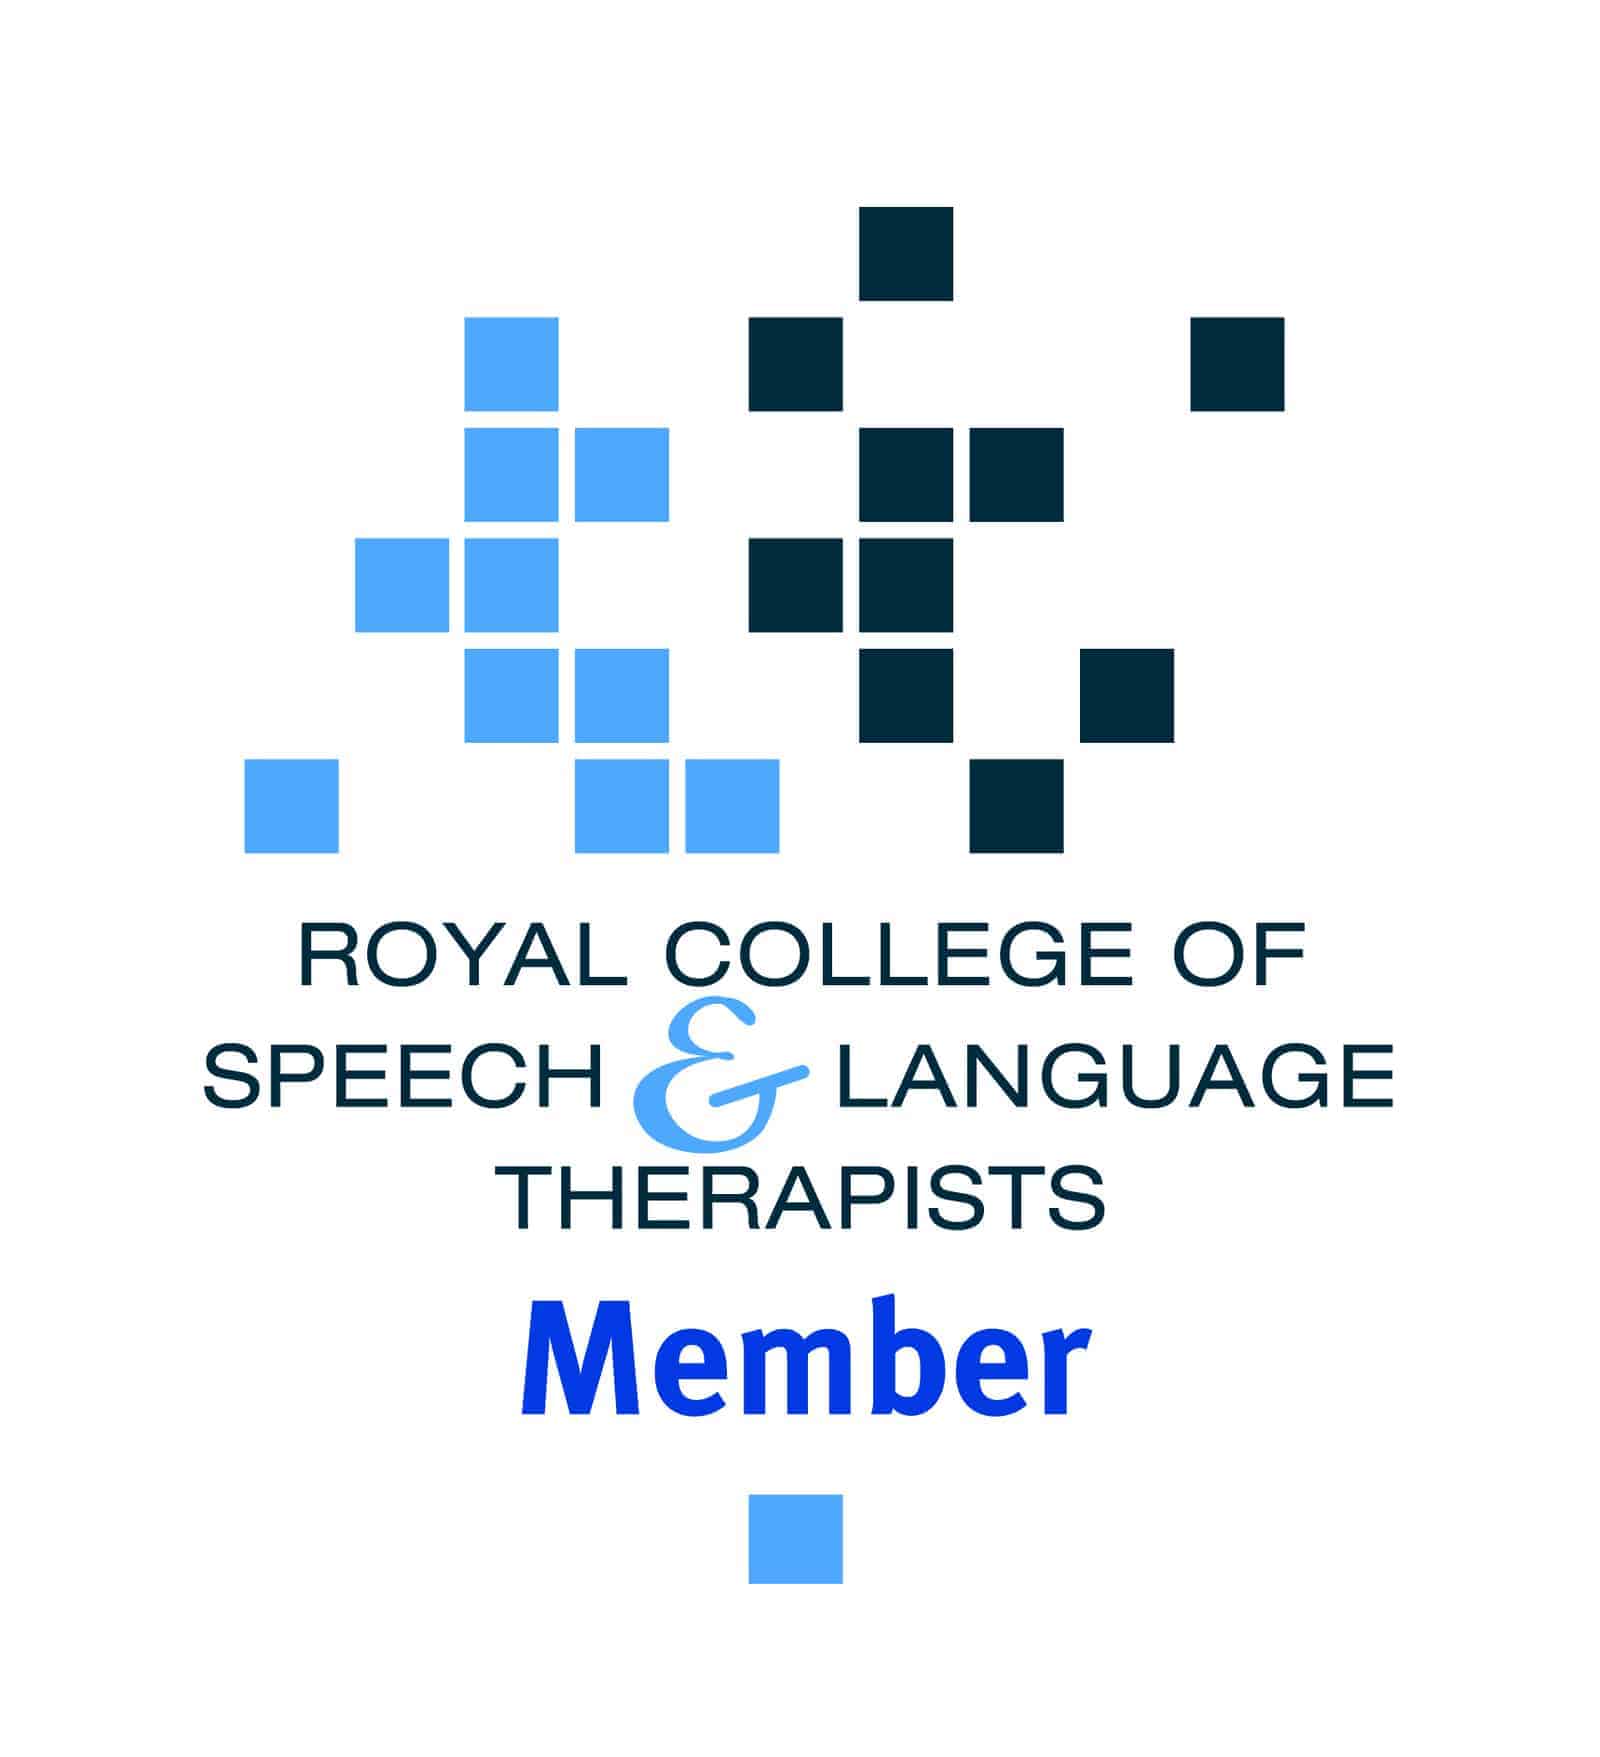 royal college of speech and language therapists